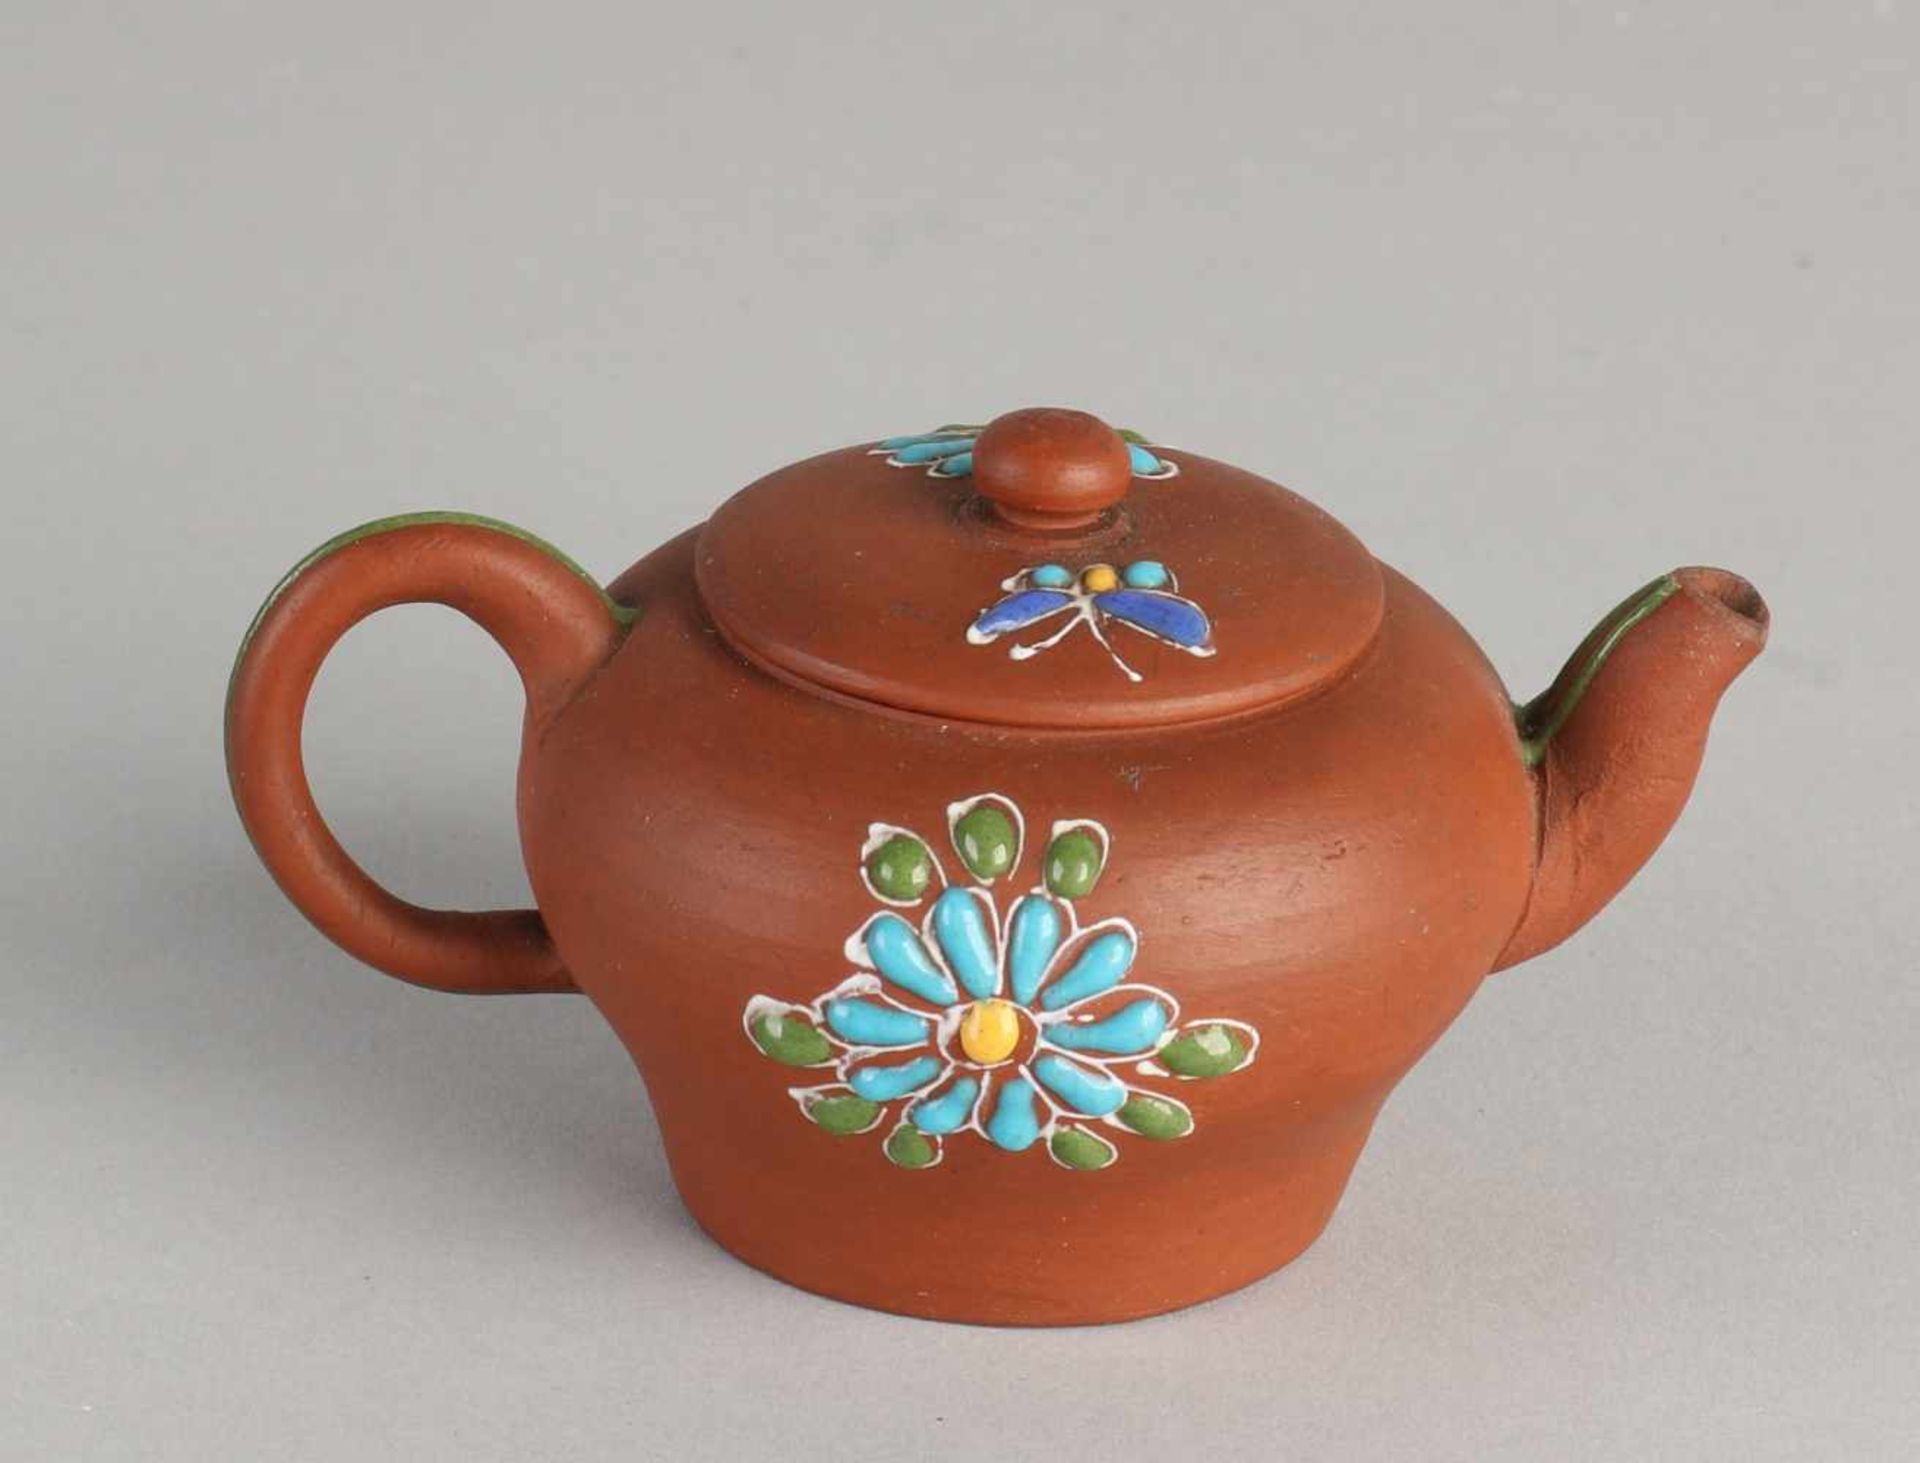 Small Chinese Yixing teapot with floral enamel decoration. Without bottom mark. Size: 4.5 x 9 x 5. - Bild 2 aus 2